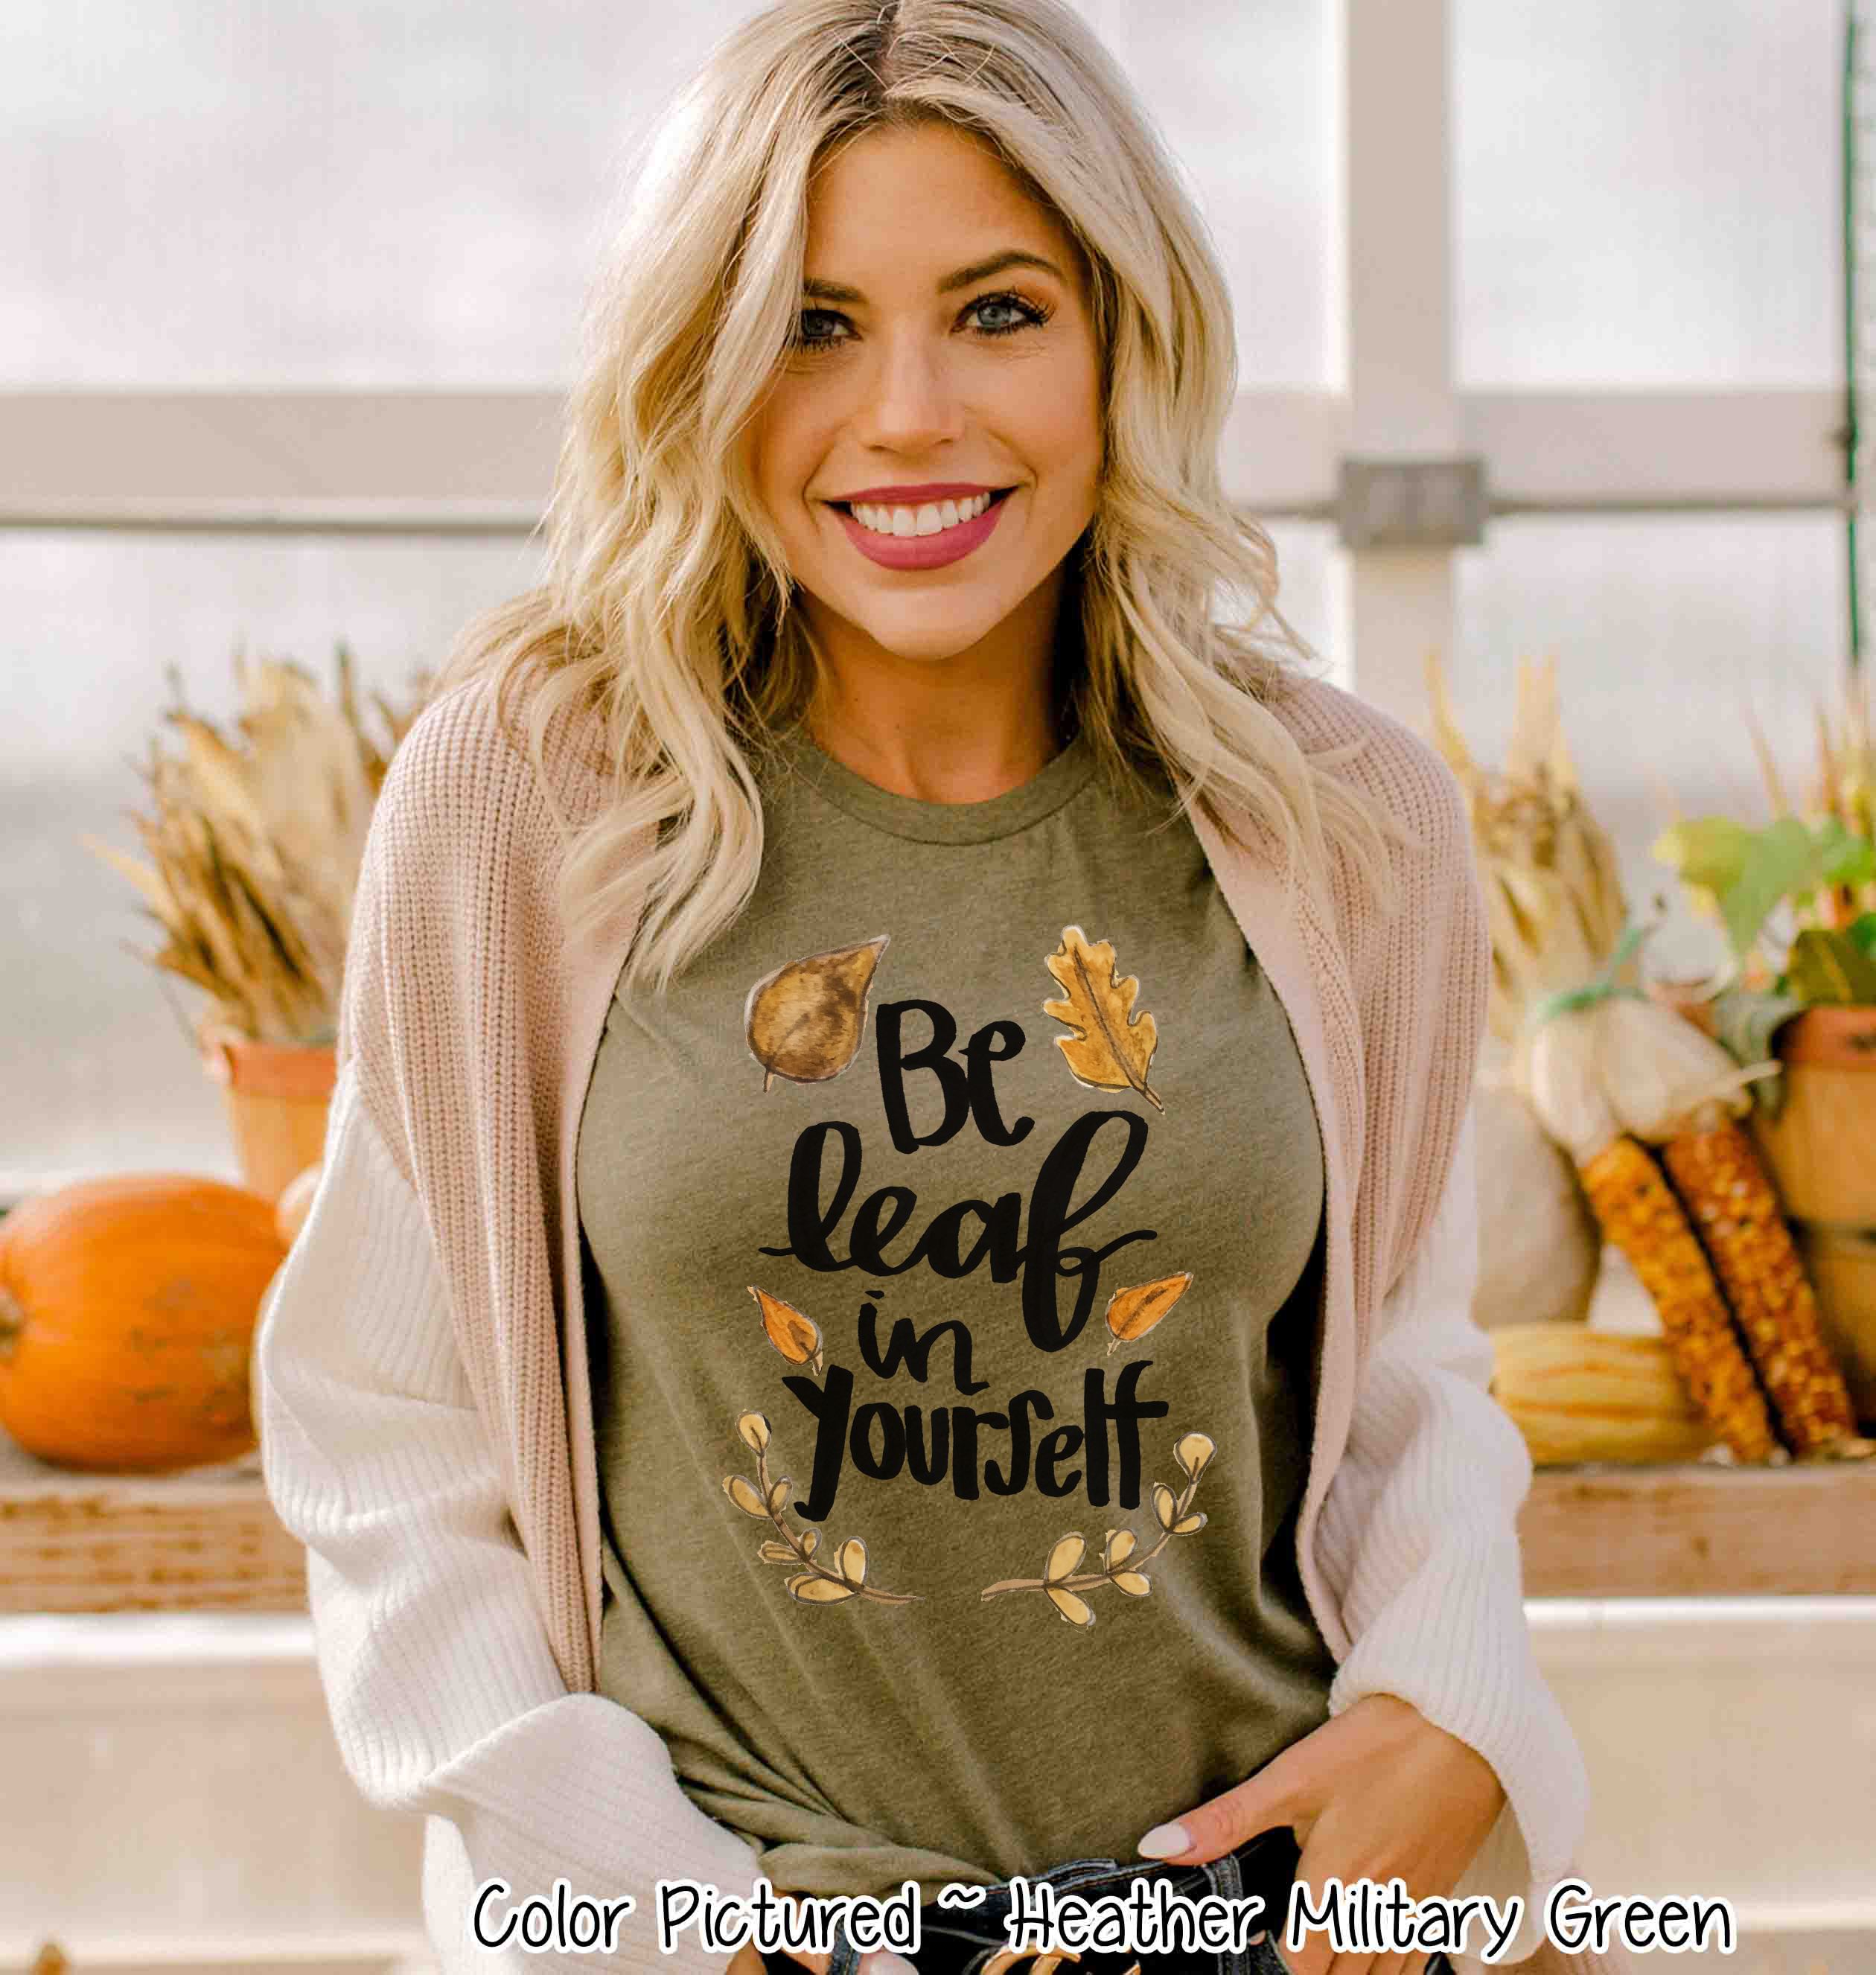 Be Leaf in Yourself Tee